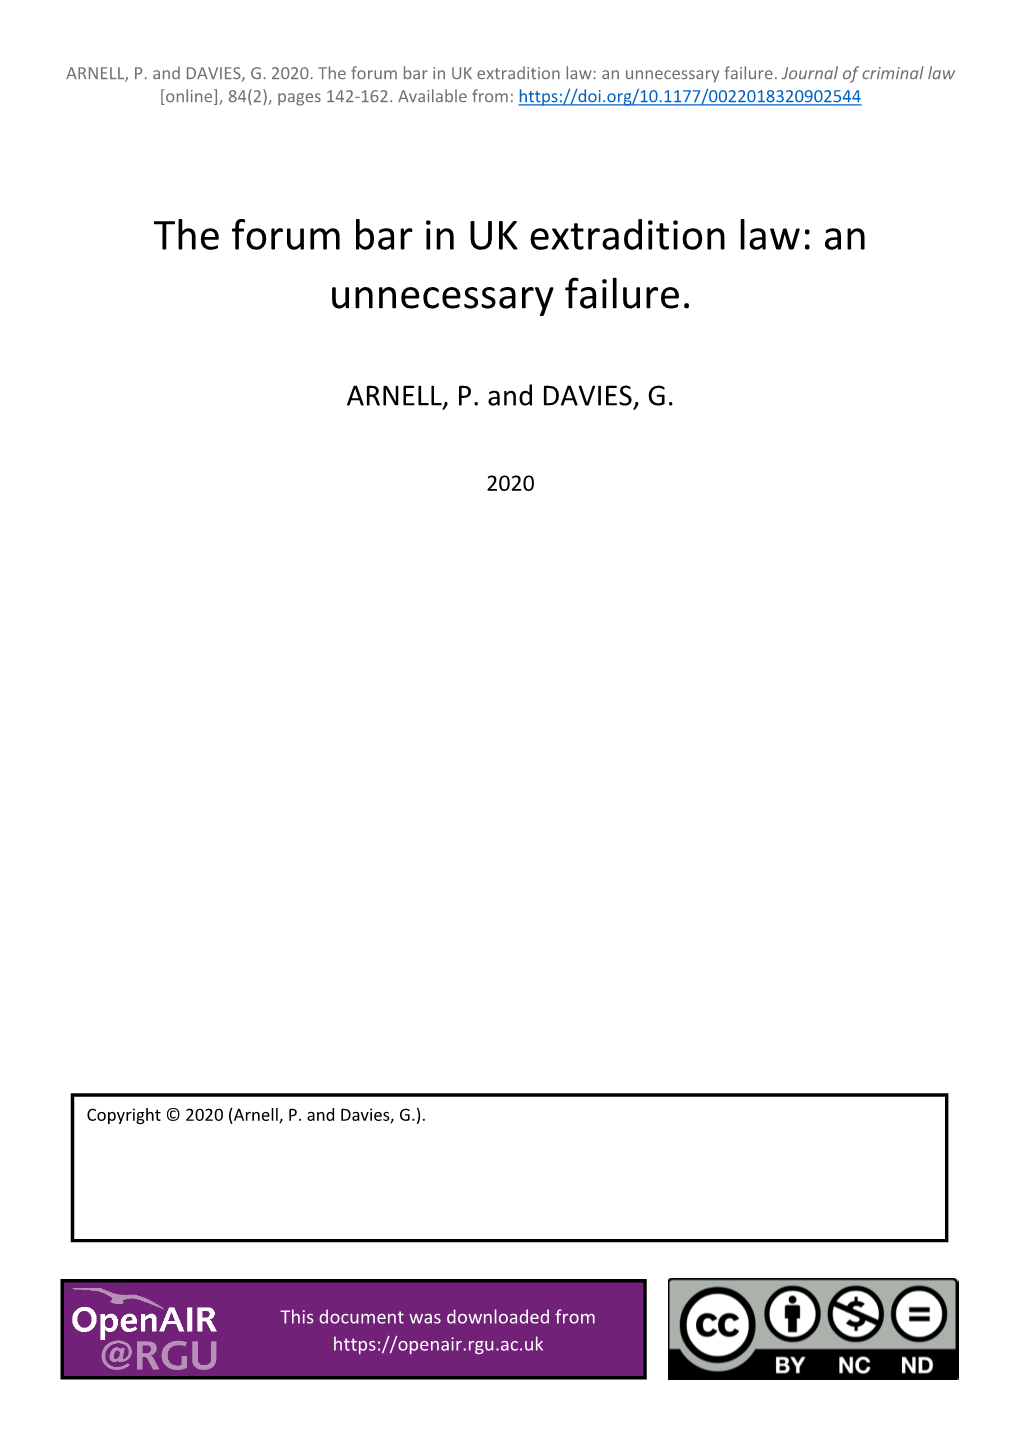 The Forum Bar in UK Extradition Law: an Unnecessary Failure